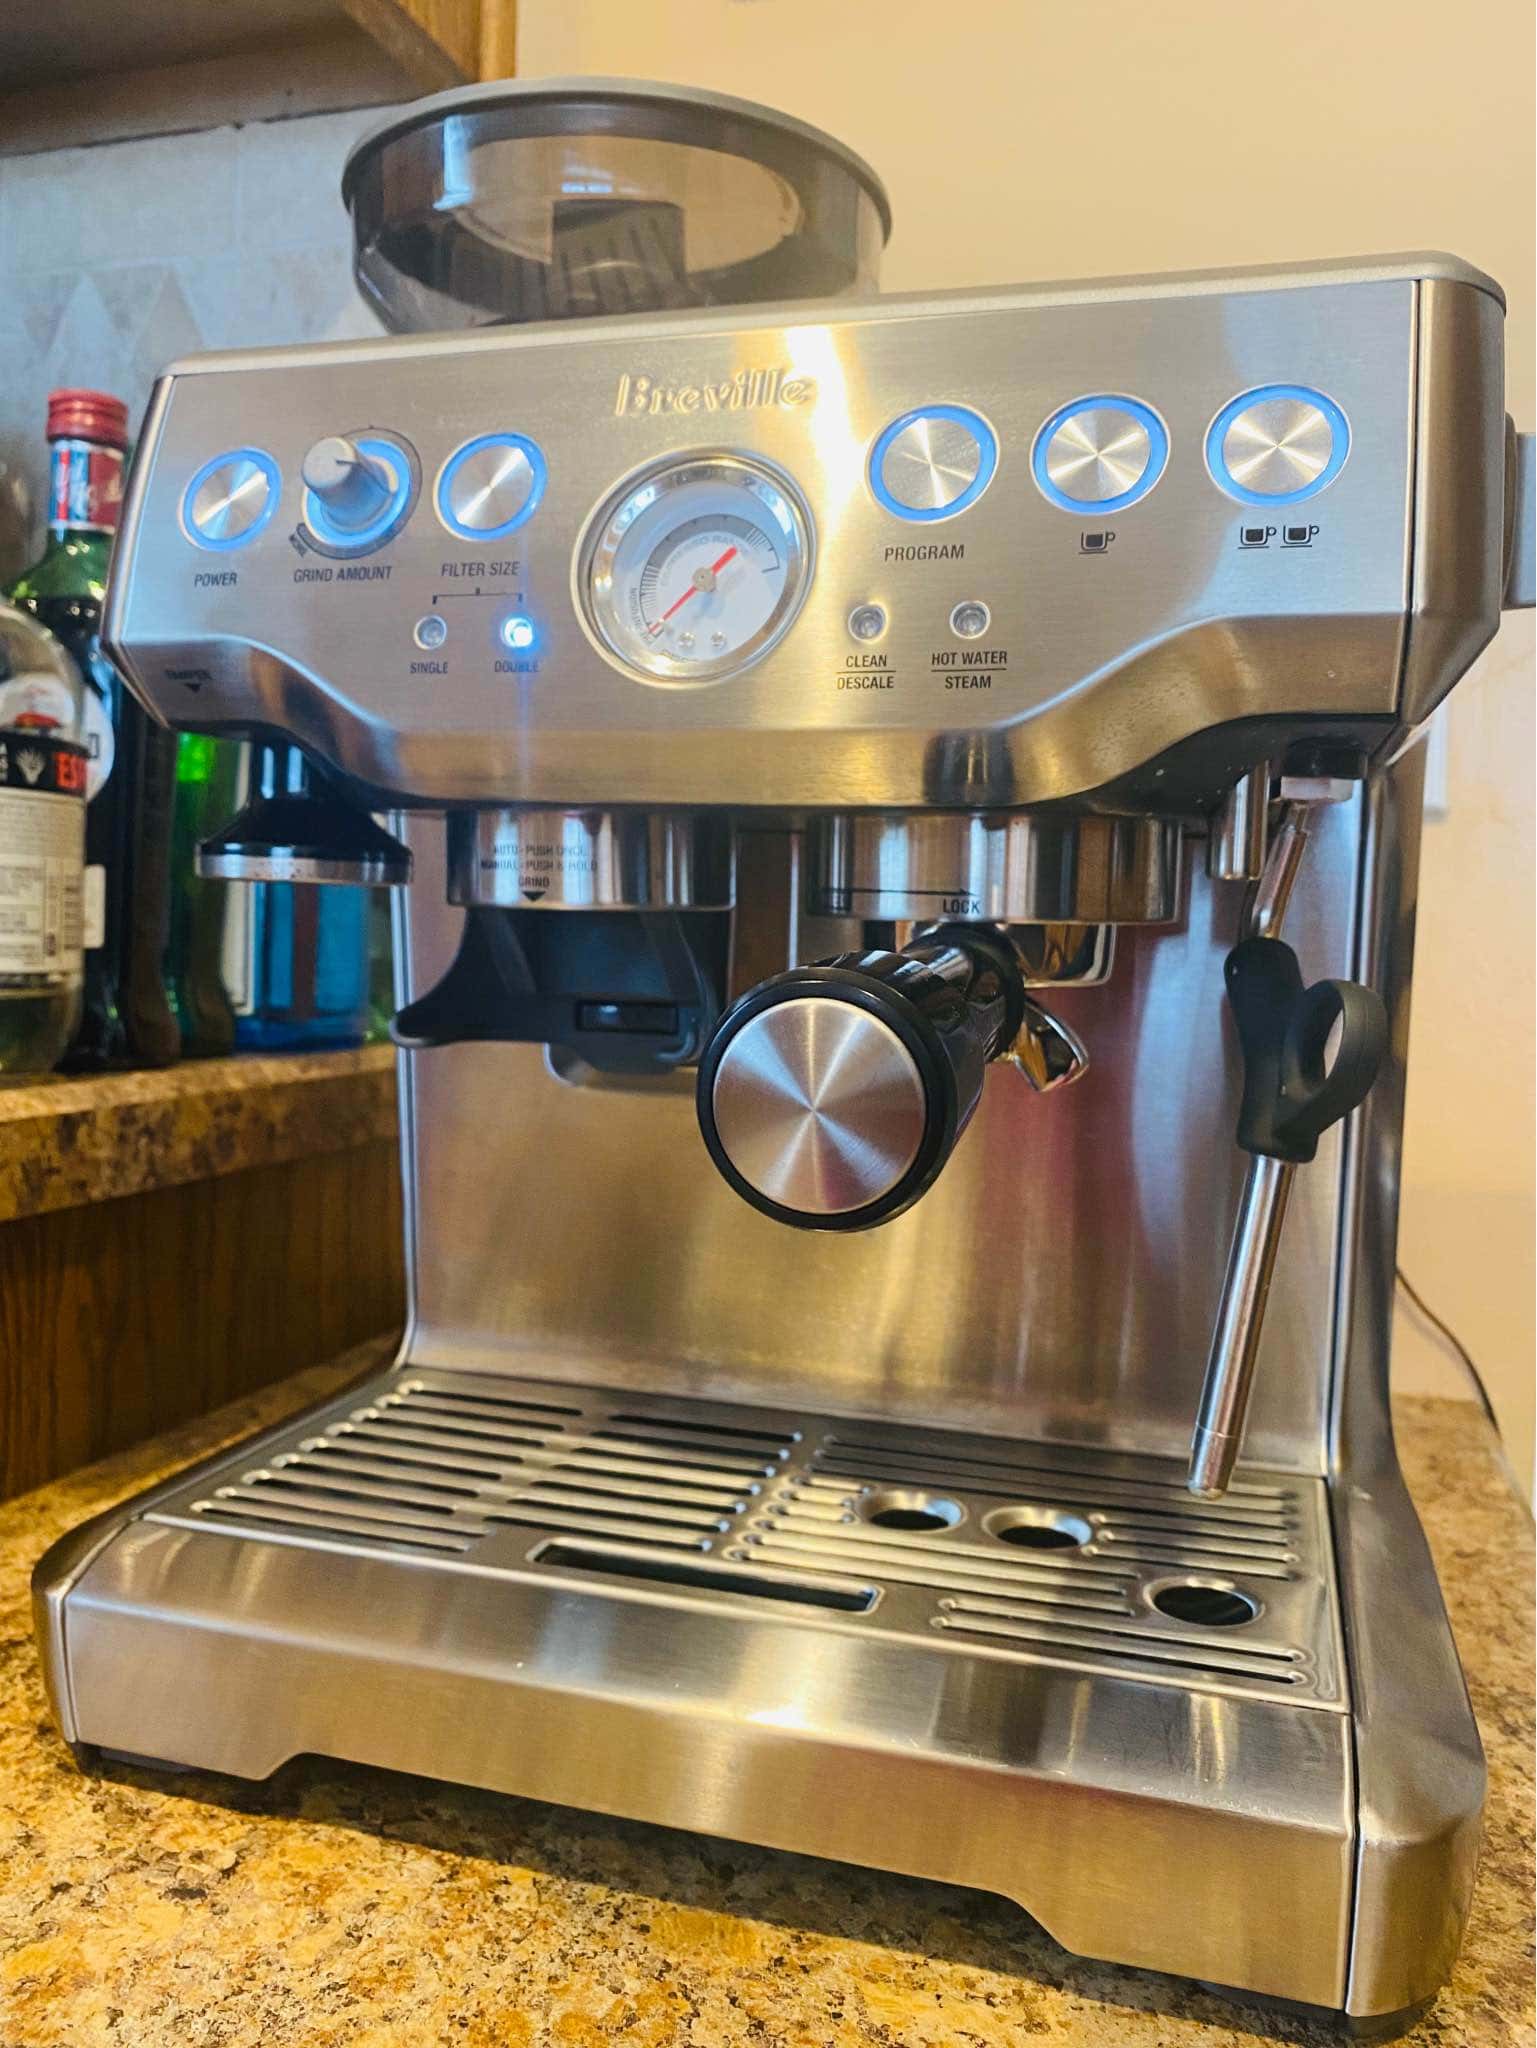 Barista Express has a more stable grinder with 16 settings